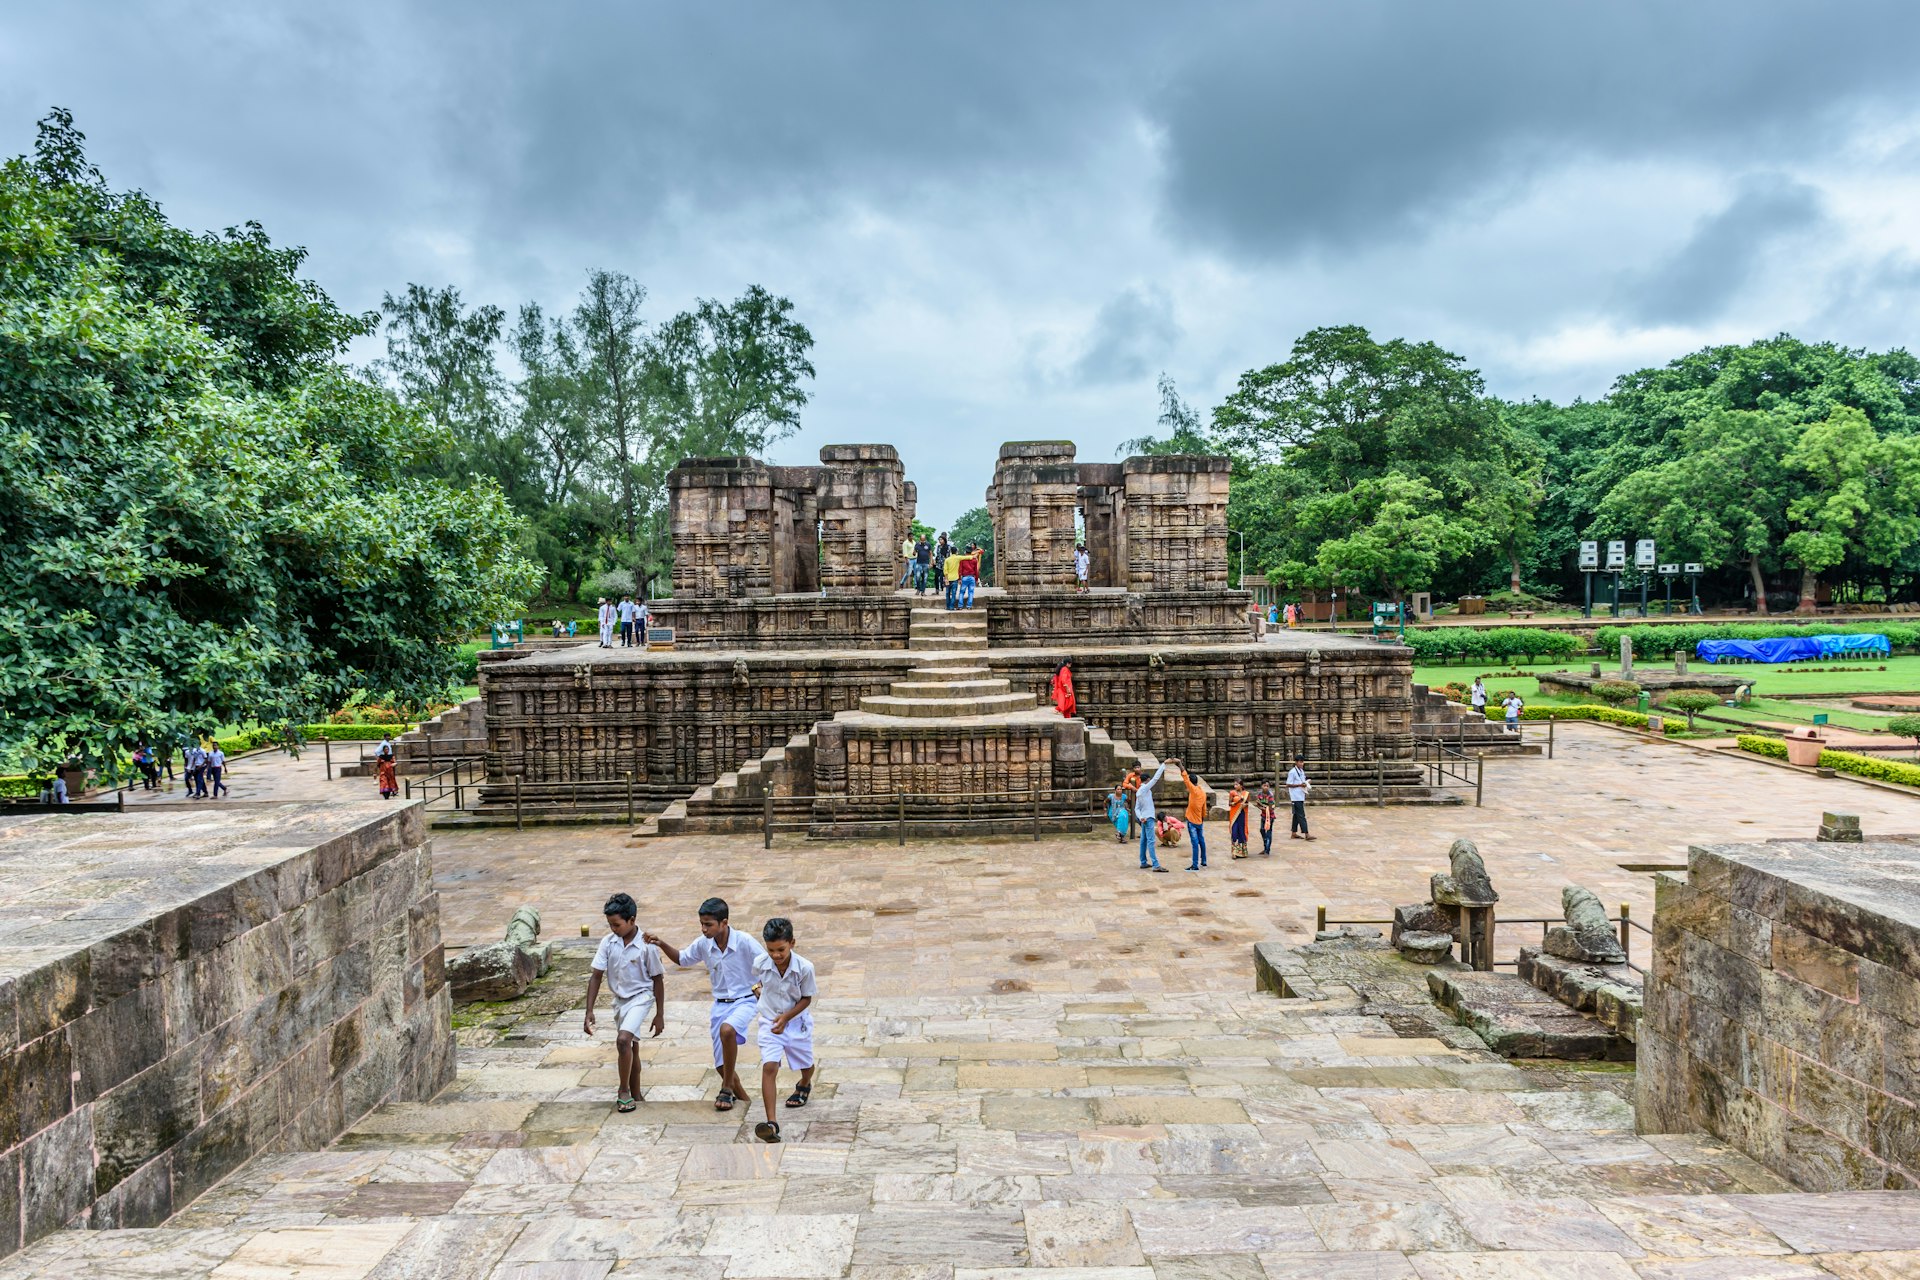 Kids run up the paths near an ancient temple in India. 